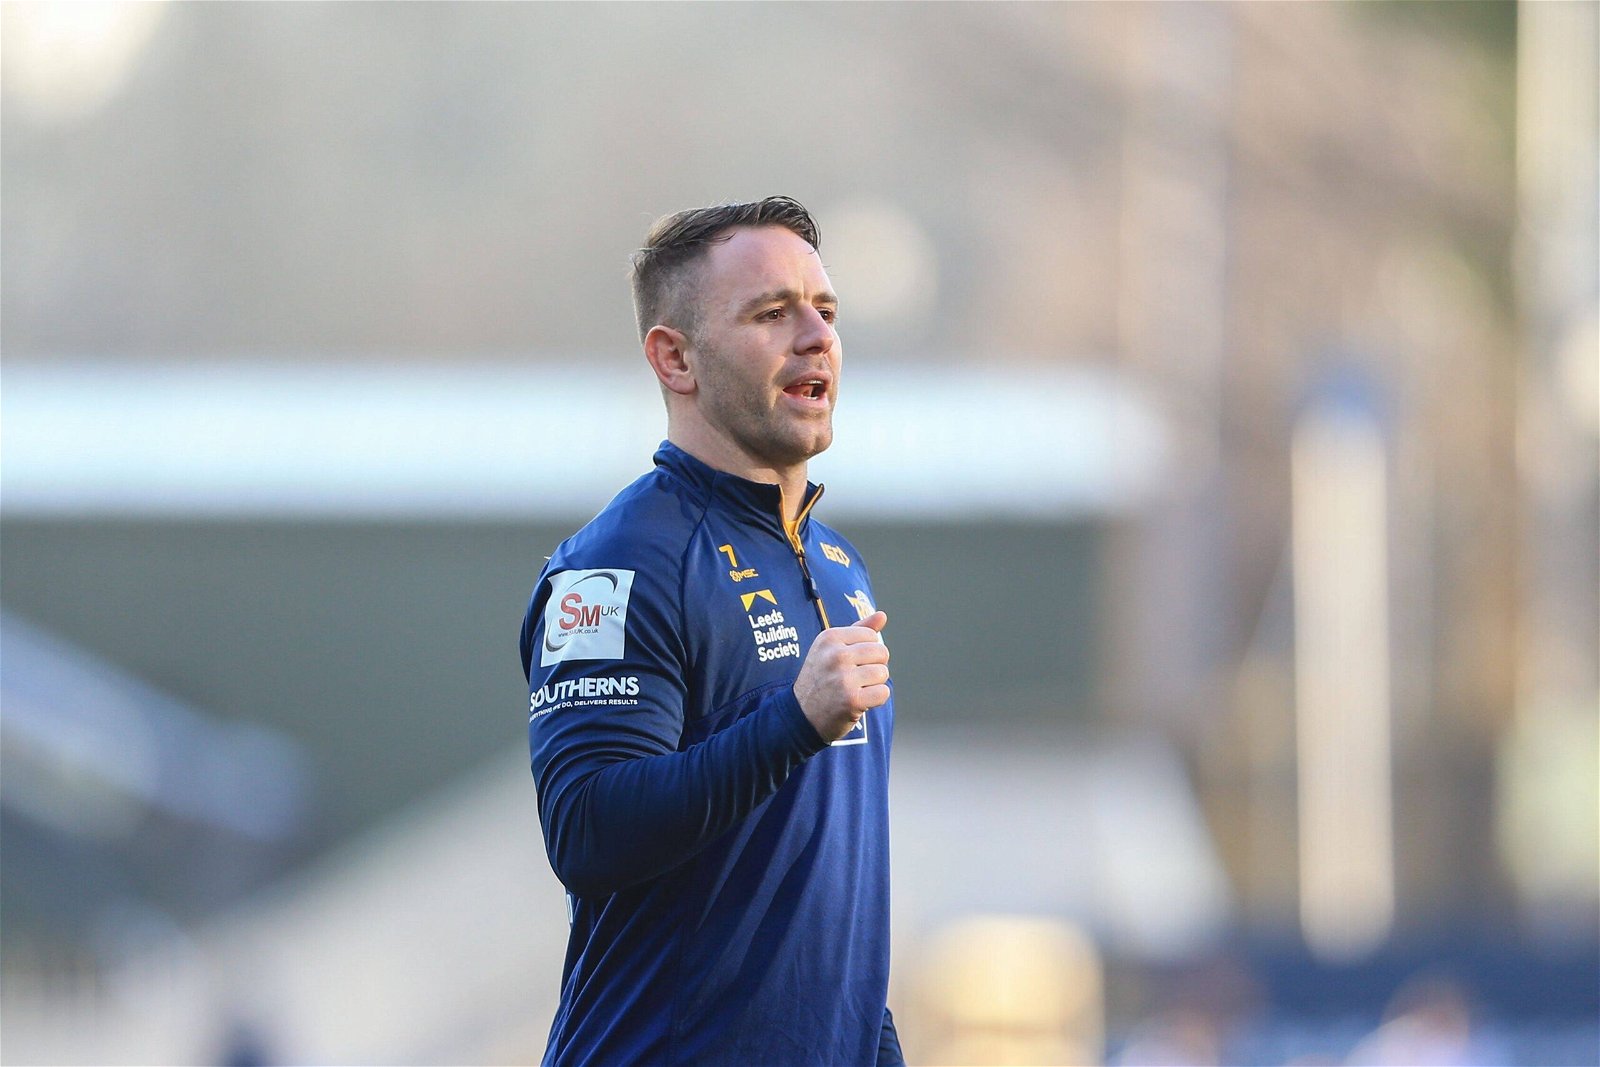 New Hull FC Director of Rugby, Richie Myler, while at Leeds Rhinos. He is in training gear.